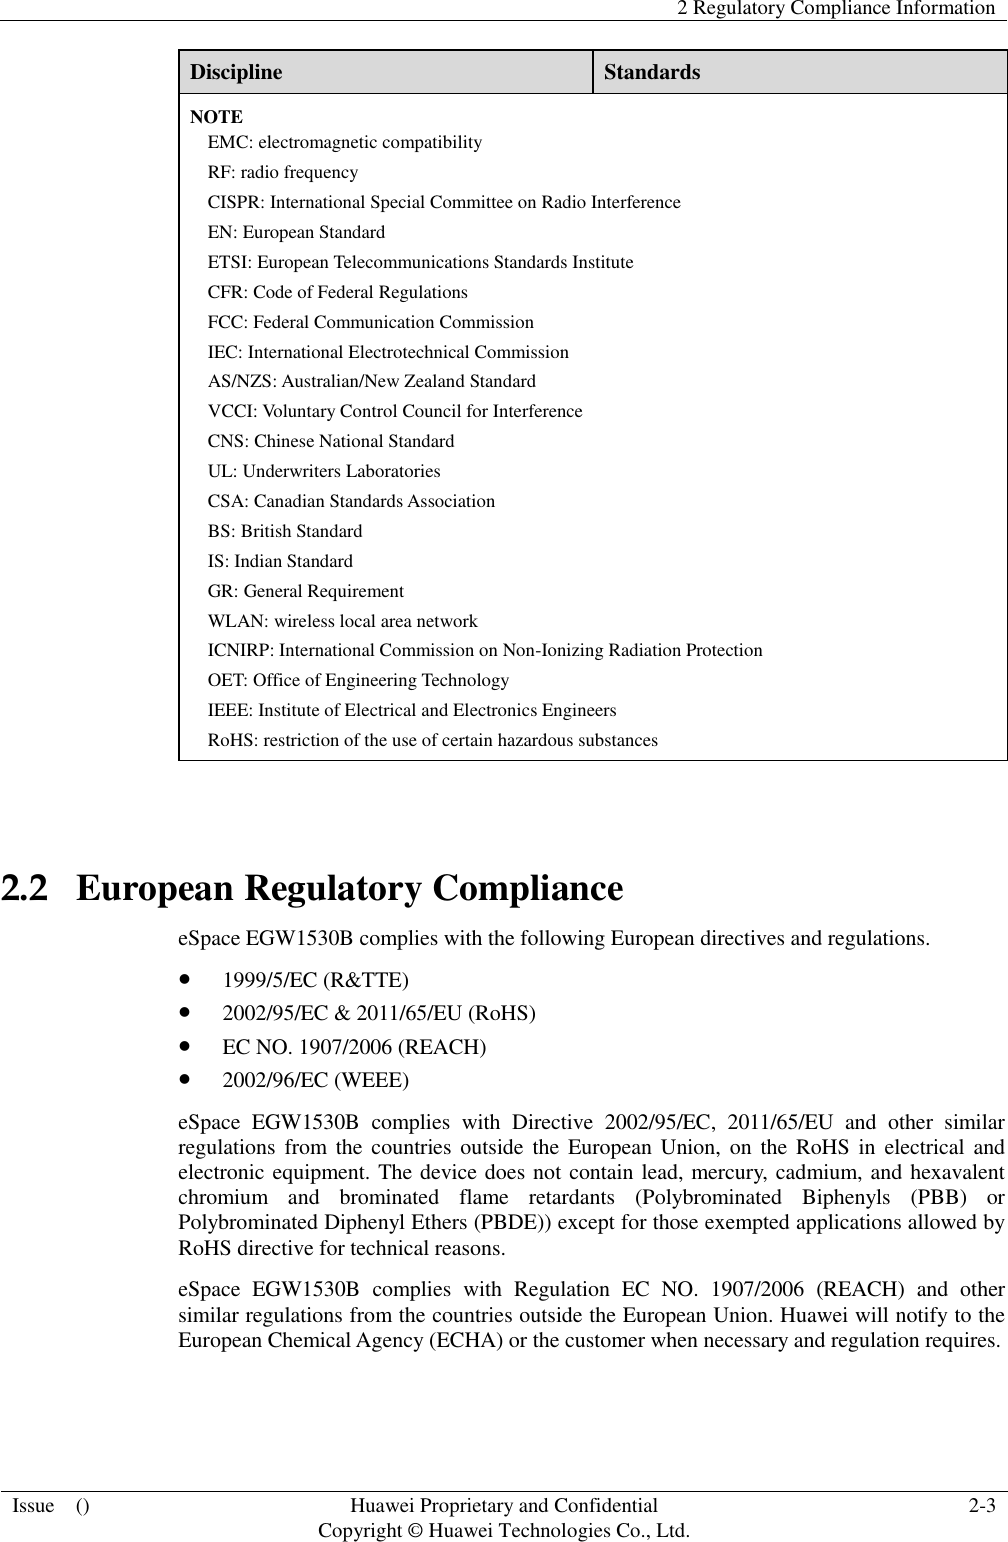   2 Regulatory Compliance Information  Issue    () Huawei Proprietary and Confidential                                     Copyright © Huawei Technologies Co., Ltd. 2-3  Discipline Standards NOTE EMC: electromagnetic compatibility RF: radio frequency CISPR: International Special Committee on Radio Interference EN: European Standard ETSI: European Telecommunications Standards Institute CFR: Code of Federal Regulations FCC: Federal Communication Commission IEC: International Electrotechnical Commission AS/NZS: Australian/New Zealand Standard VCCI: Voluntary Control Council for Interference CNS: Chinese National Standard UL: Underwriters Laboratories CSA: Canadian Standards Association BS: British Standard IS: Indian Standard GR: General Requirement WLAN: wireless local area network ICNIRP: International Commission on Non-Ionizing Radiation Protection OET: Office of Engineering Technology IEEE: Institute of Electrical and Electronics Engineers RoHS: restriction of the use of certain hazardous substances  2.2   European Regulatory Compliance eSpace EGW1530B complies with the following European directives and regulations.  1999/5/EC (R&amp;TTE)  2002/95/EC &amp; 2011/65/EU (RoHS)  EC NO. 1907/2006 (REACH)  2002/96/EC (WEEE) eSpace  EGW1530B  complies  with  Directive  2002/95/EC,  2011/65/EU  and  other  similar regulations from  the  countries  outside  the  European Union, on the RoHS in electrical and electronic equipment. The device does not contain lead, mercury, cadmium, and hexavalent chromium  and  brominated  flame  retardants  (Polybrominated  Biphenyls  (PBB)  or Polybrominated Diphenyl Ethers (PBDE)) except for those exempted applications allowed by RoHS directive for technical reasons.   eSpace  EGW1530B  complies  with  Regulation  EC  NO.  1907/2006  (REACH)  and  other similar regulations from the countries outside the European Union. Huawei will notify to the European Chemical Agency (ECHA) or the customer when necessary and regulation requires.  